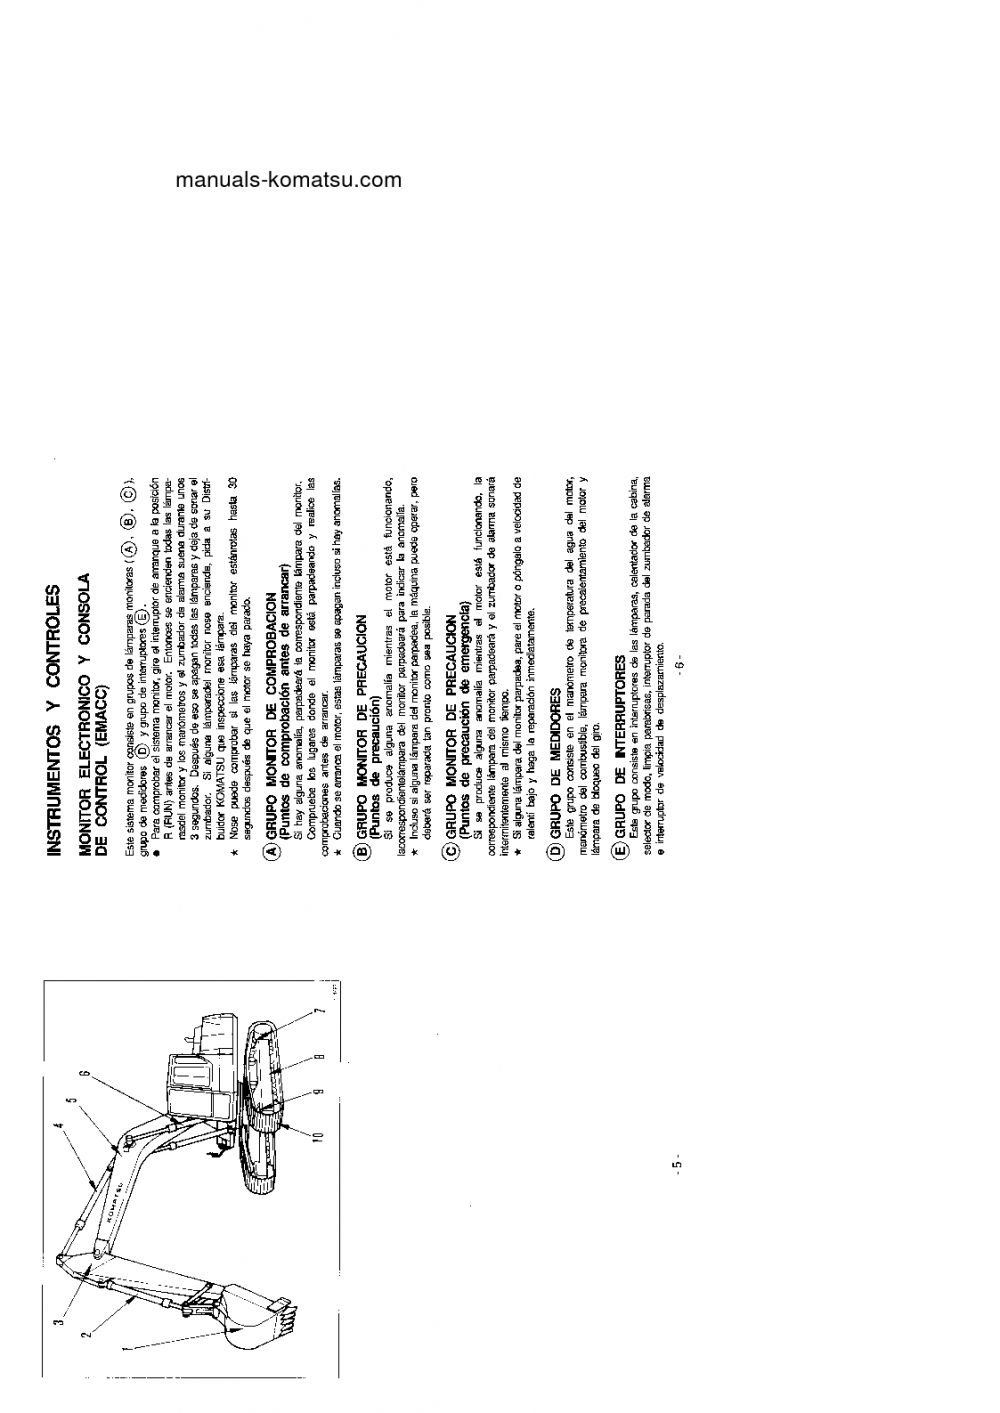 Protected: PC240-5(GBR)-K S/N K20001-UP Operation manual (Spanish)